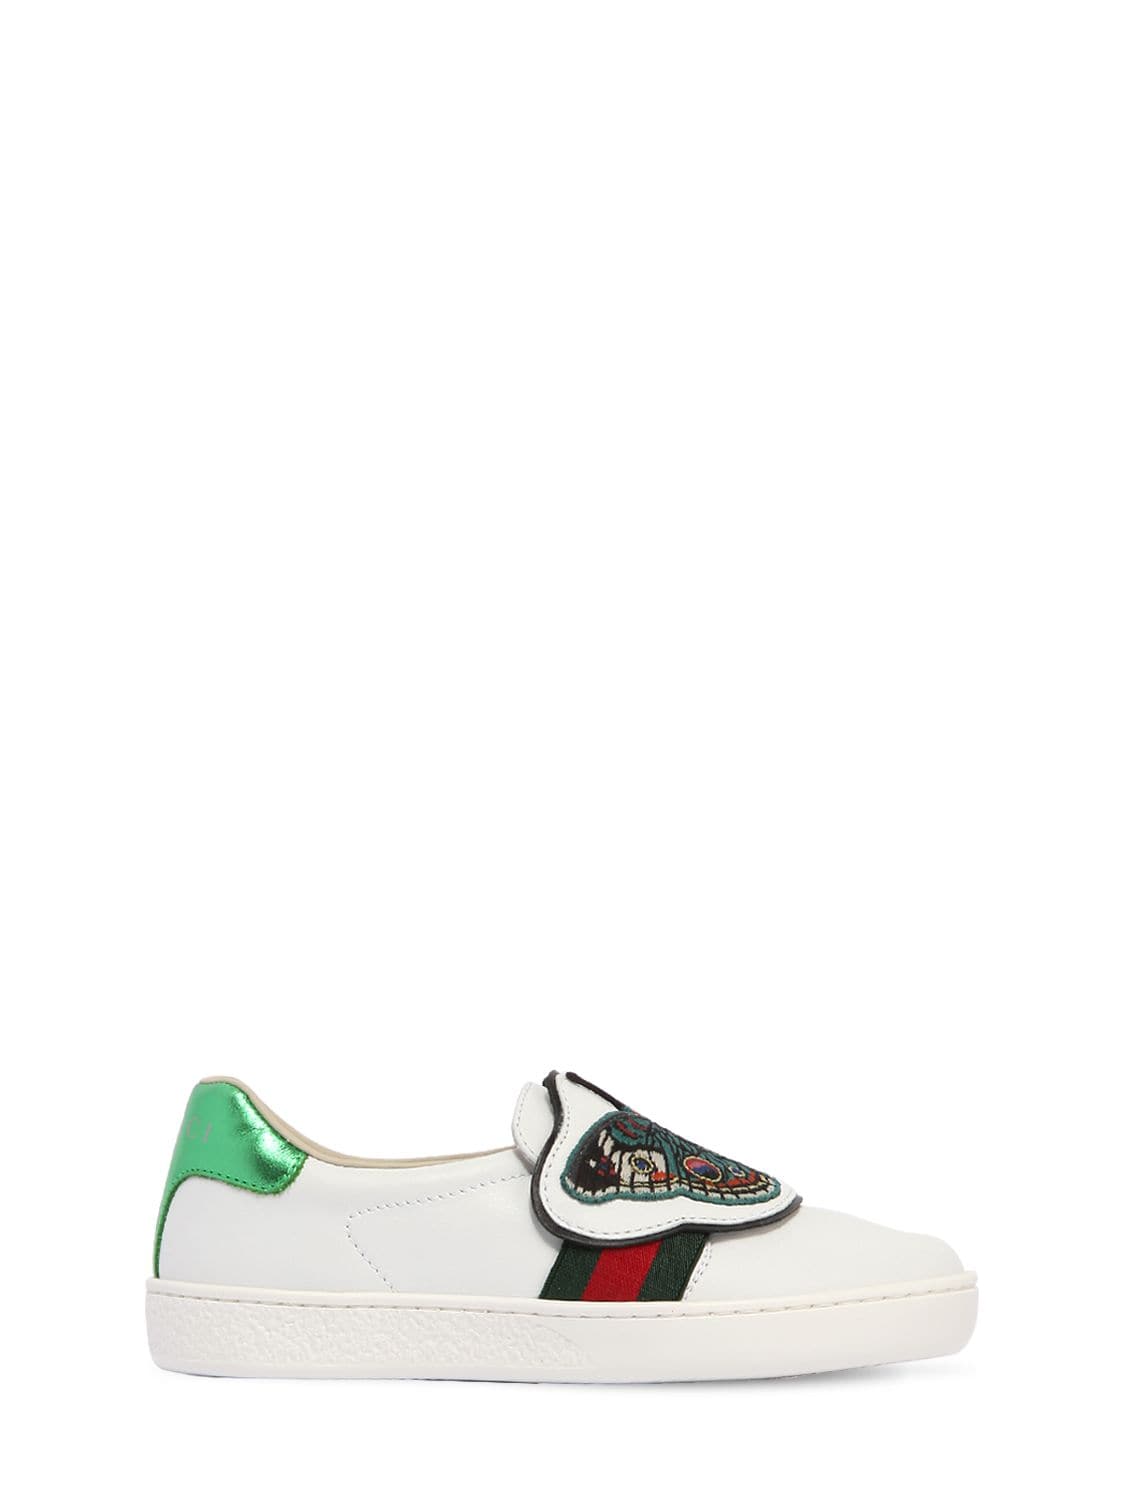 Gucci Kids' Butterfly Leather Slip-on Sneakers In White